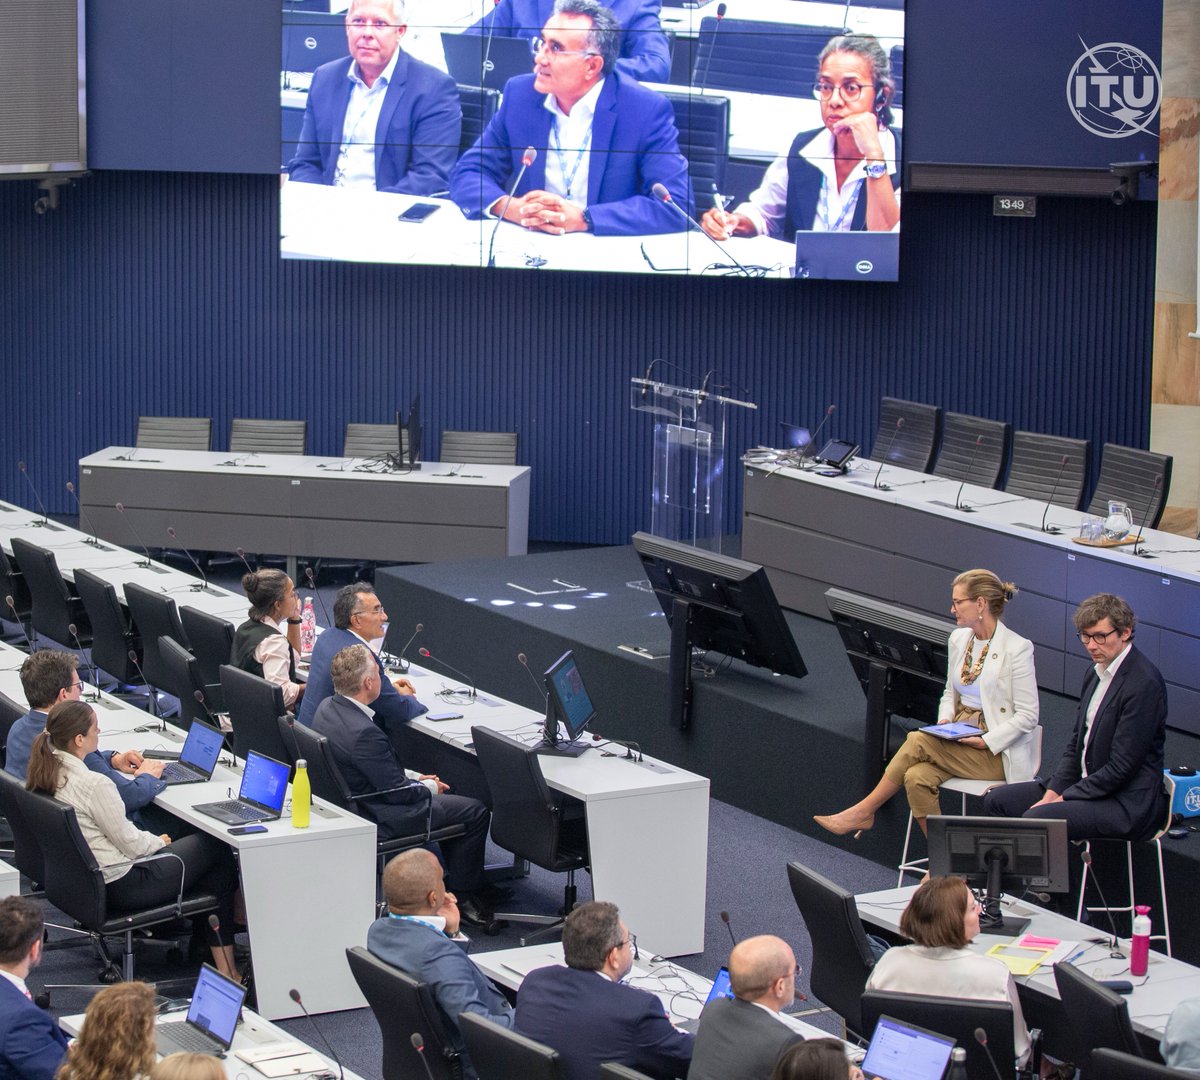 A #FitForFutureITU starts with our staff so the regular Townhalls are a great way to bring everyone together to look back on progress so far, forward to our action-packed agenda, and feedback on how we can best go further together